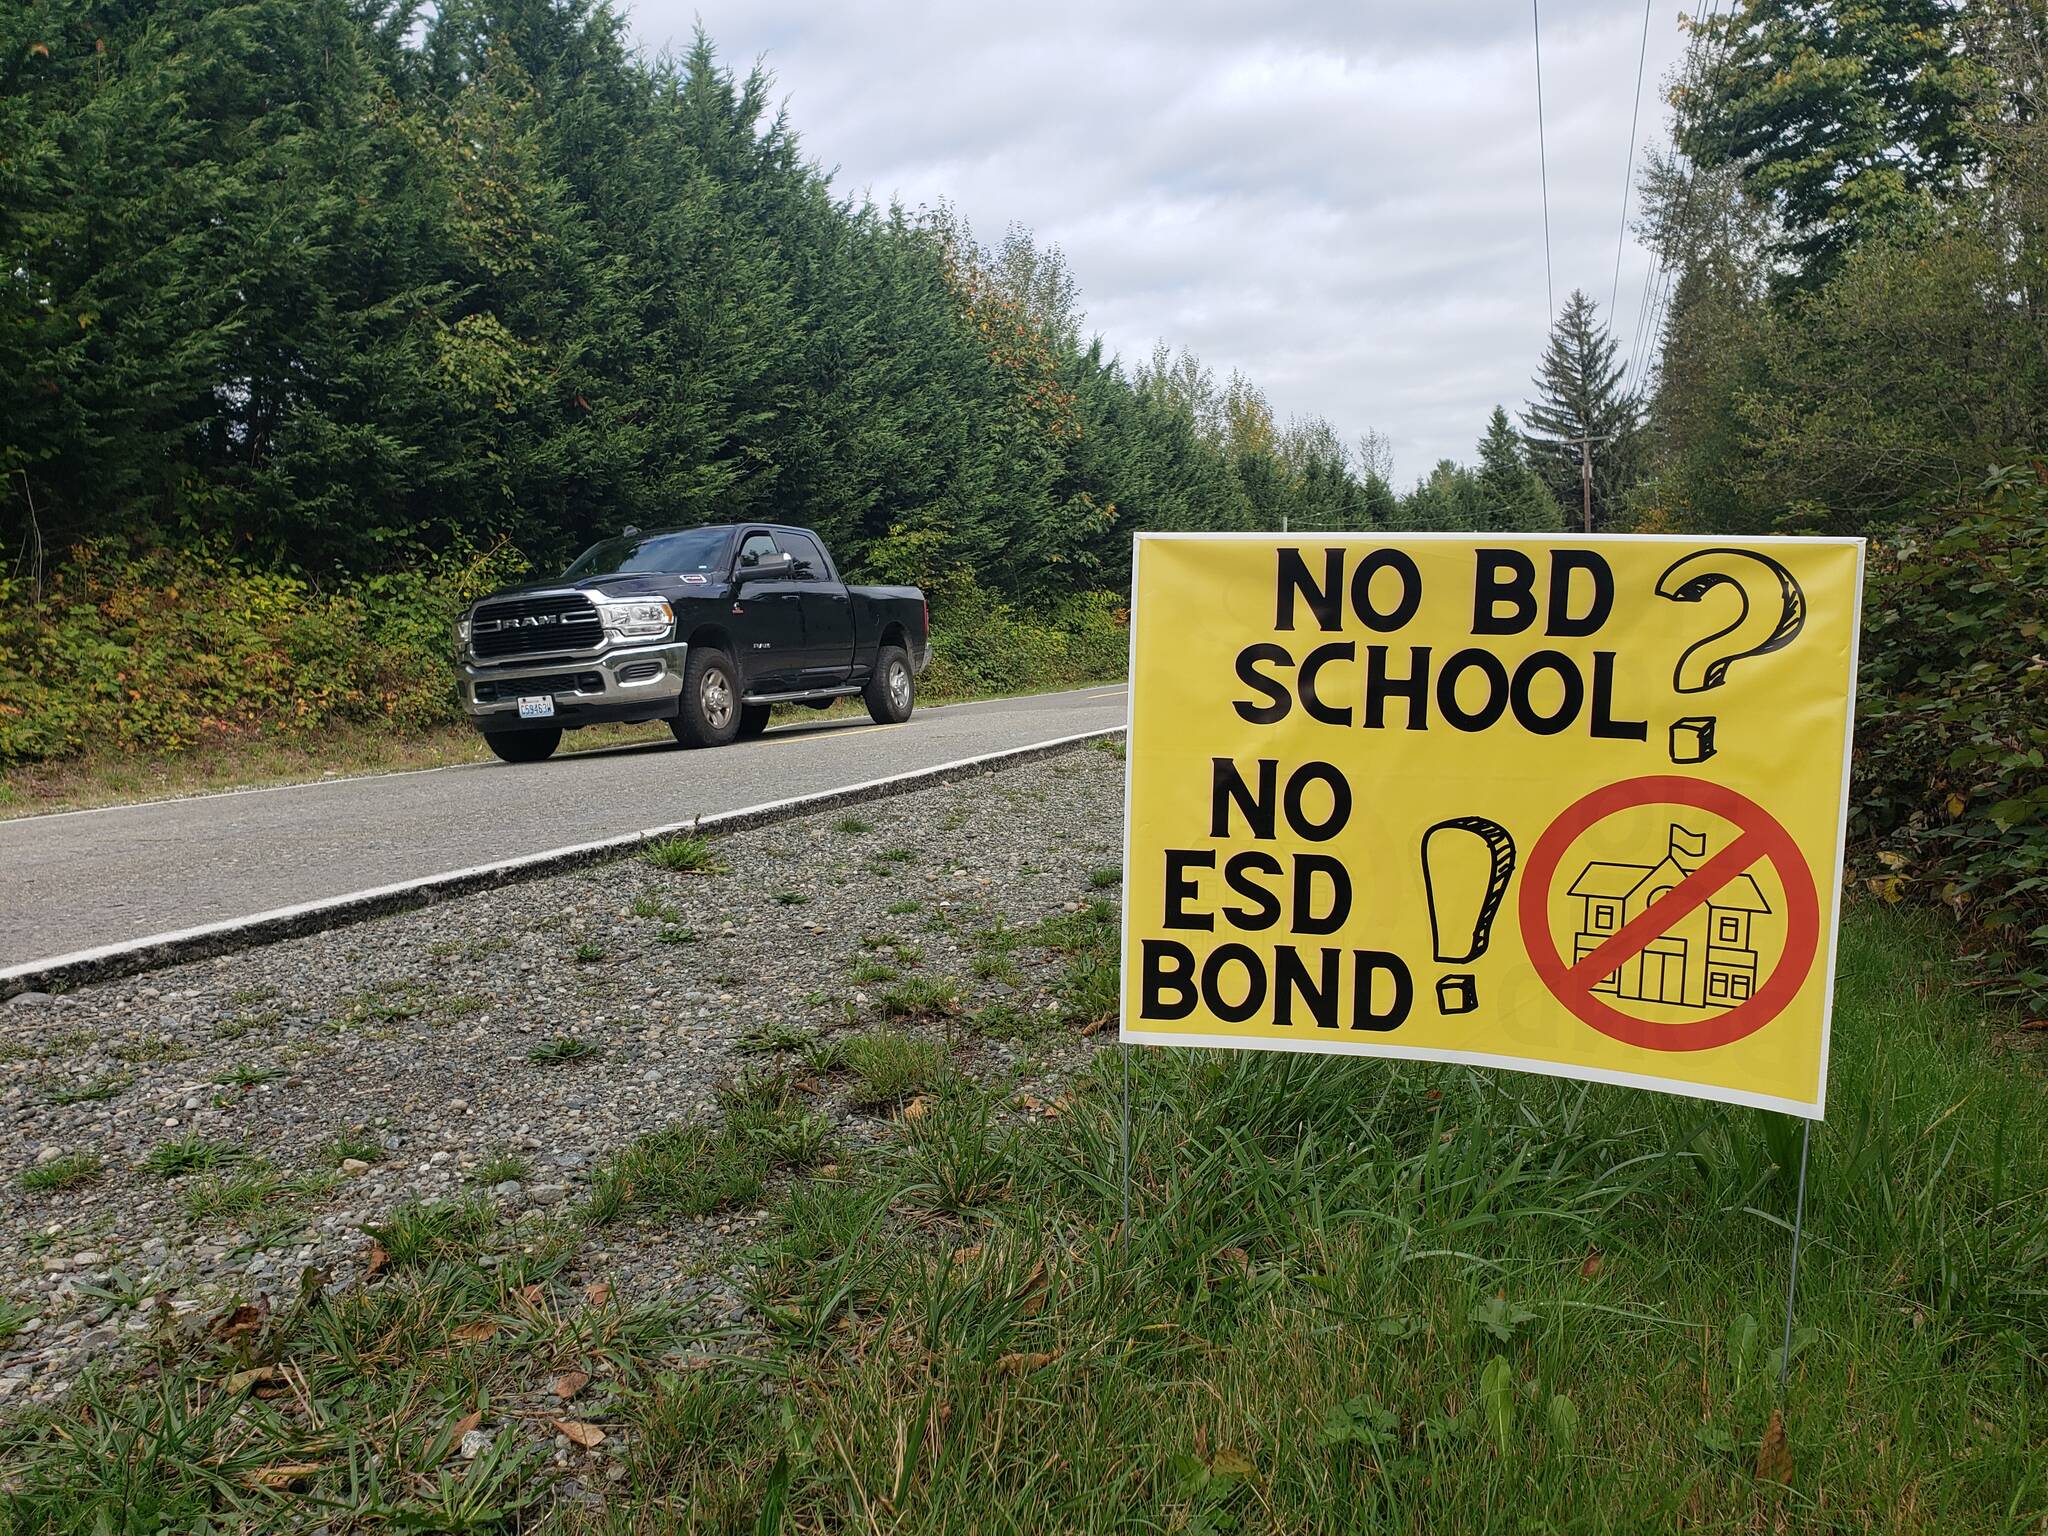 Photo by Ray Miller-Still
The Enumclaw School District might have a hard time meeting the 60% approval requirement for their bond measure on Nov. 7, since the new bond doesn’t fund a Black Diamond elementary school.